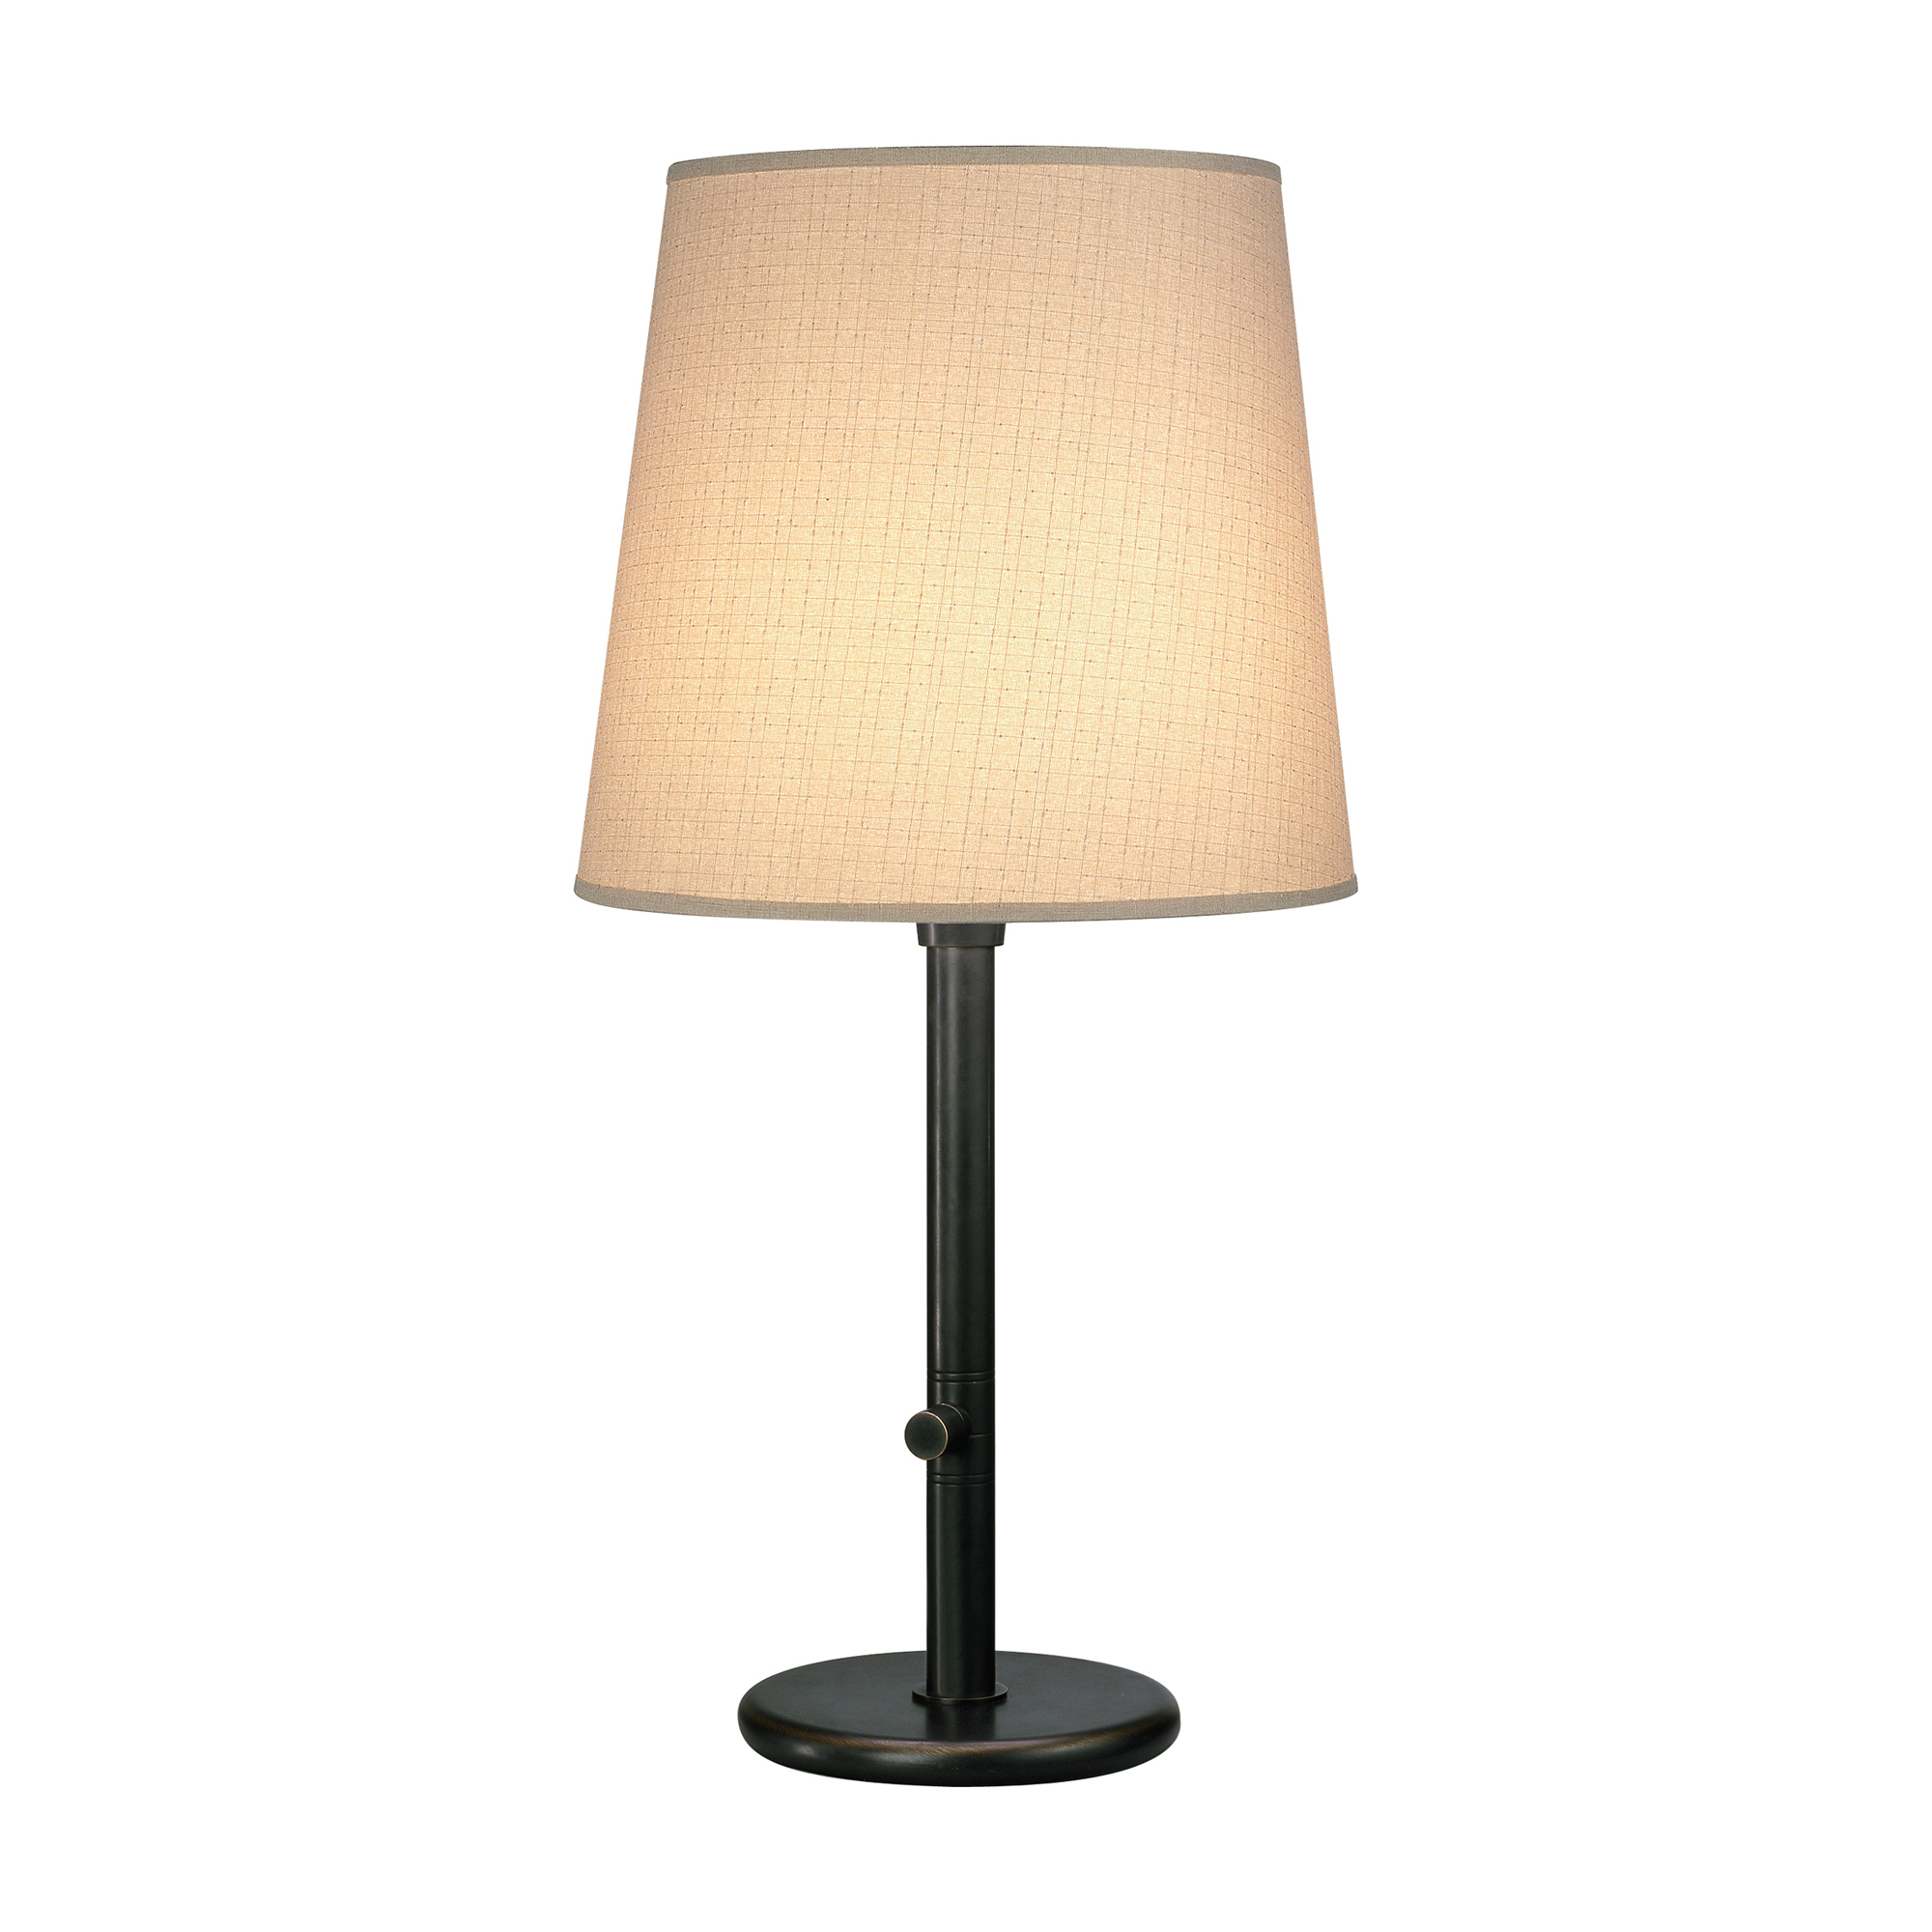 Rico Espinet Buster Chica Accent Lamp Style #2083